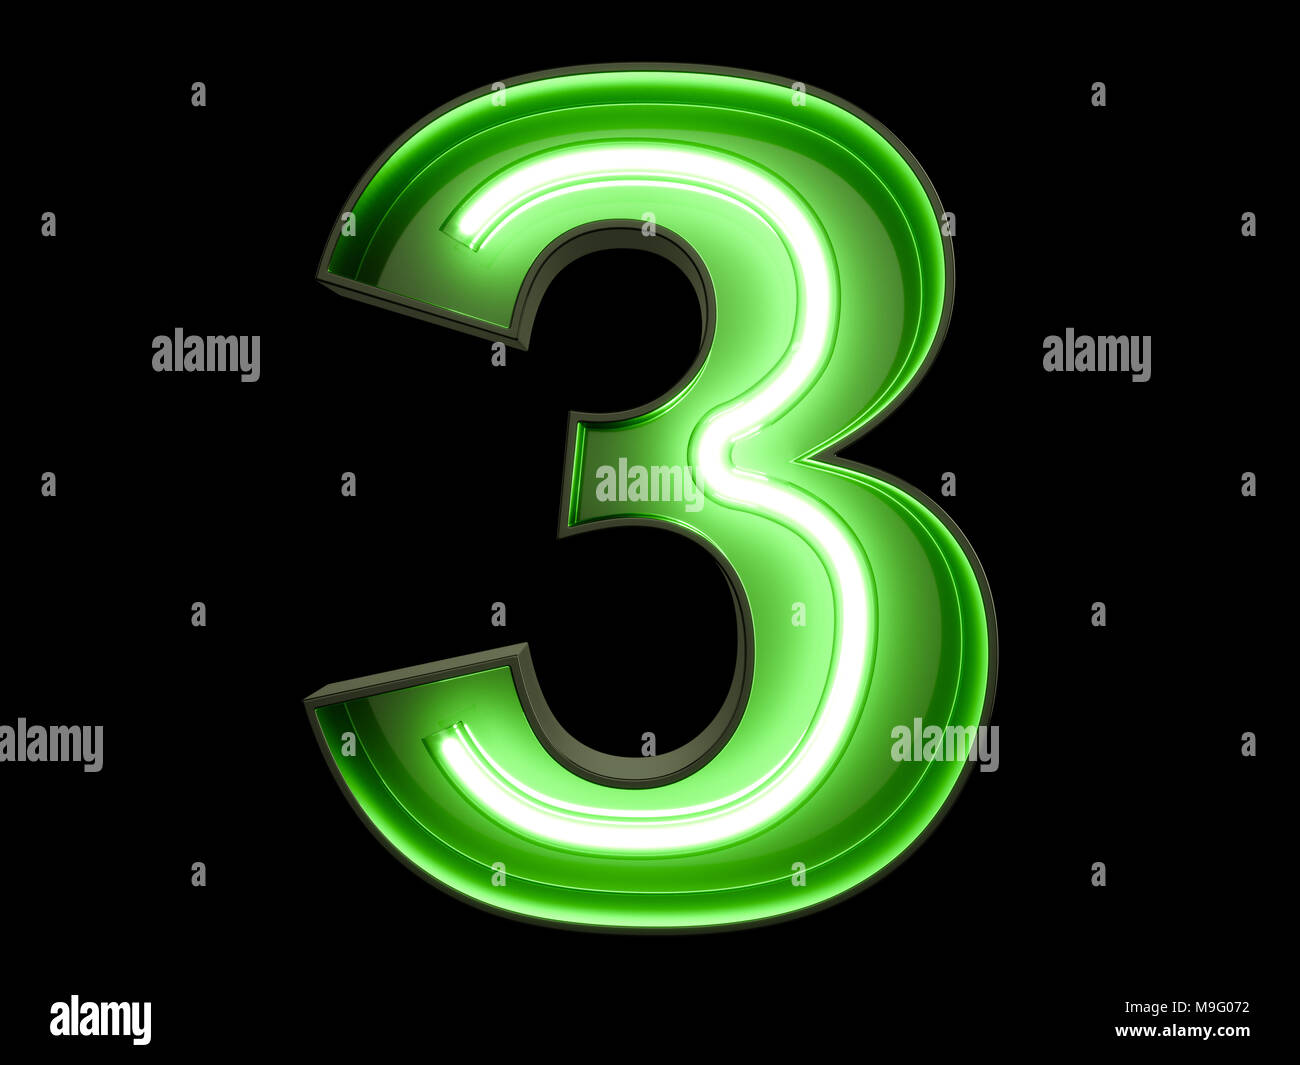 Neon green light glowing digit alphabet character 3 three font. Front view  illuminated number 3 symbol on black background. 3d rendering illustration  Stock Photo - Alamy